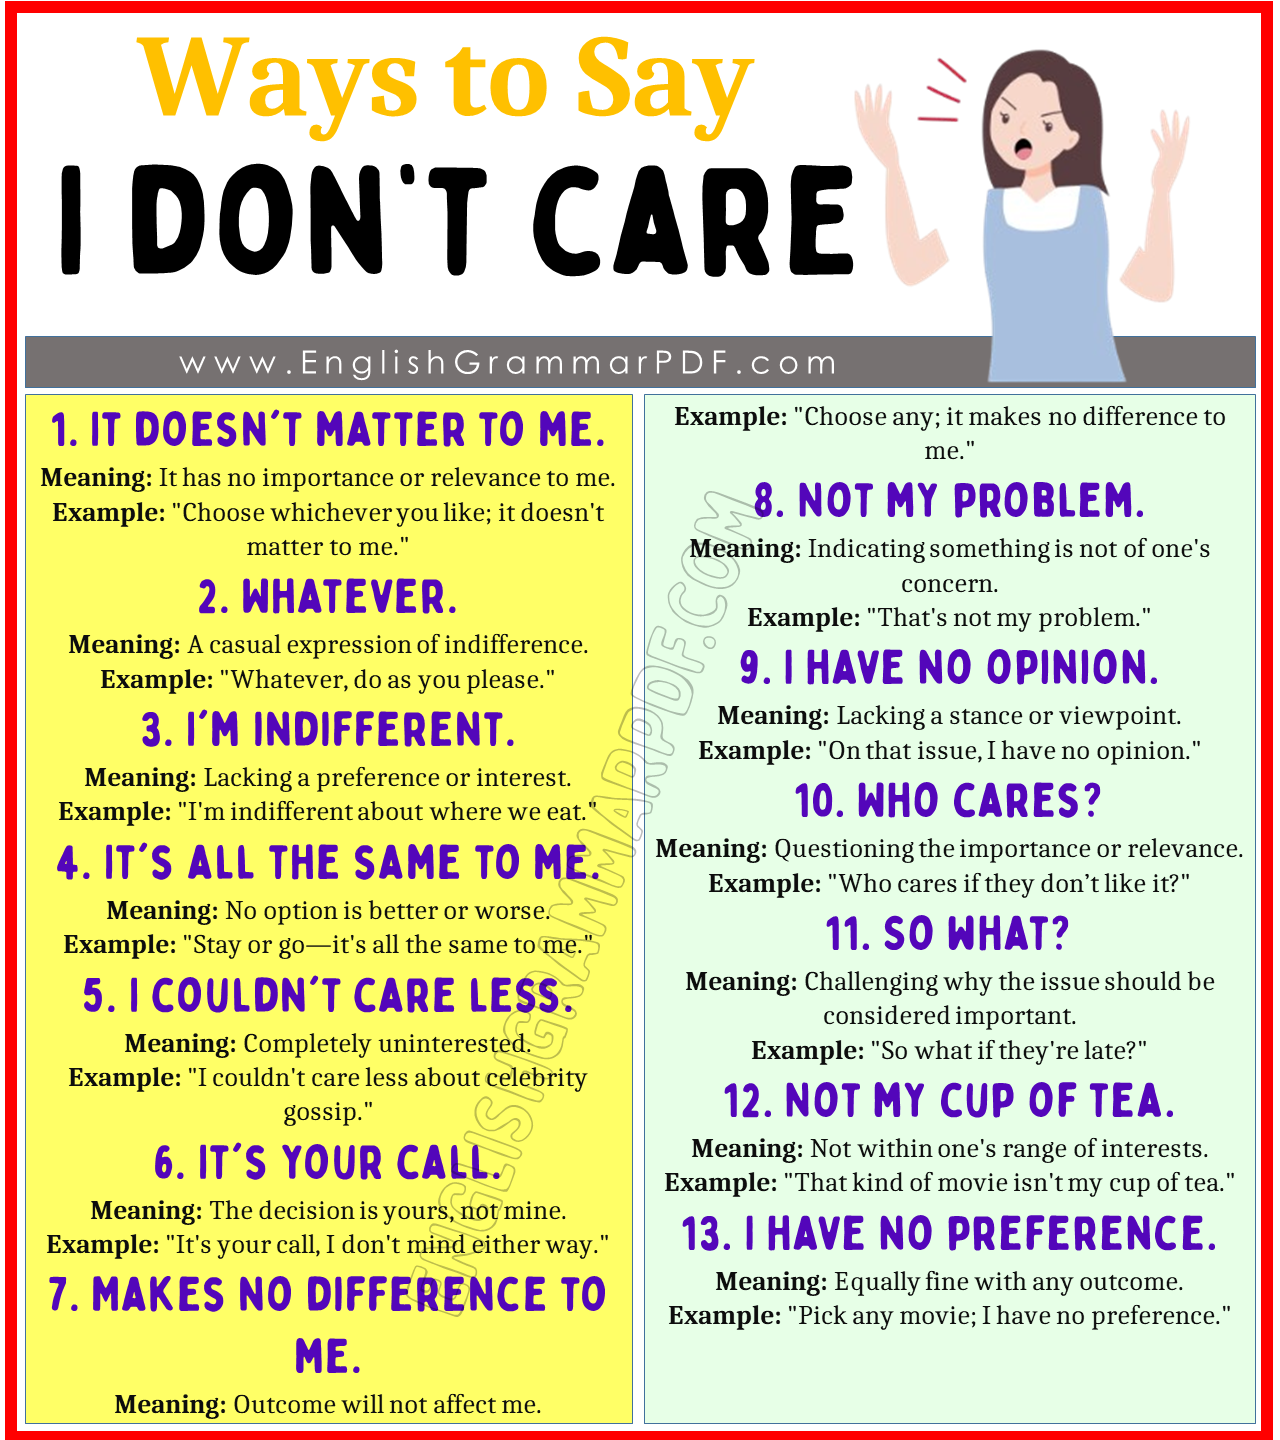 Ways to Say I Don't Care